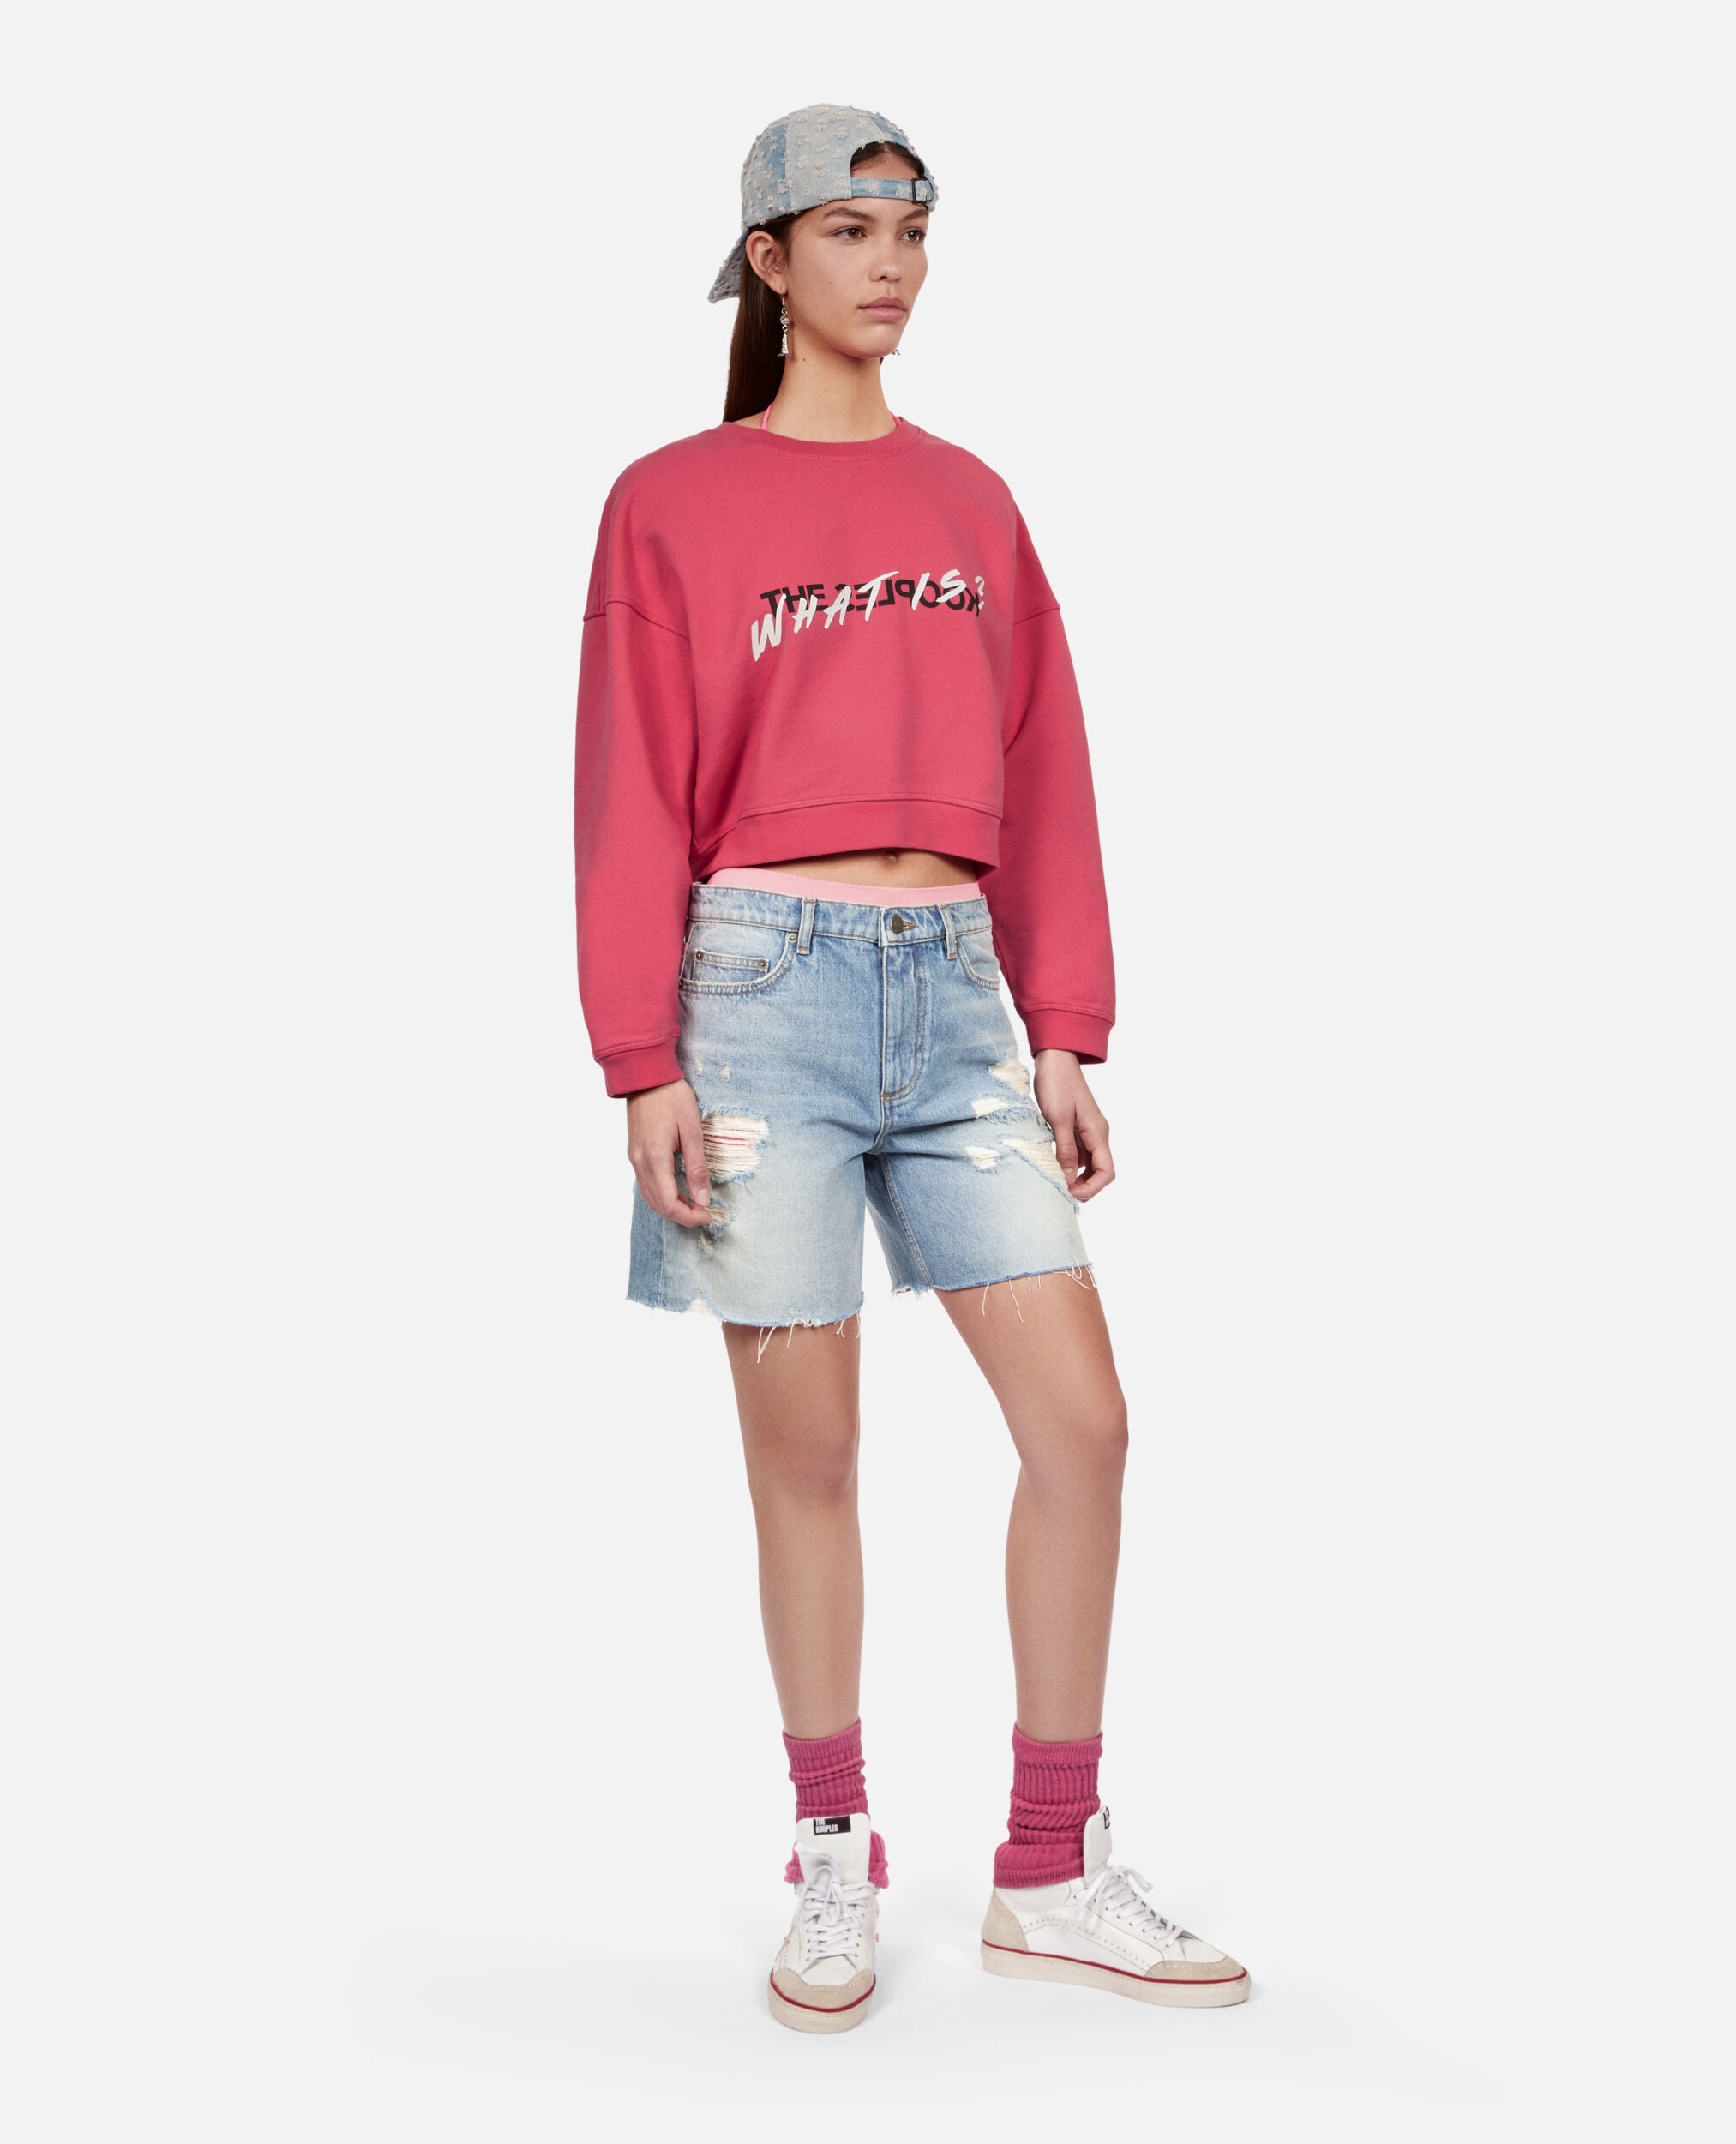 Sweatshirt What is court fuchsia, RETRO PINK, hi-res image number null